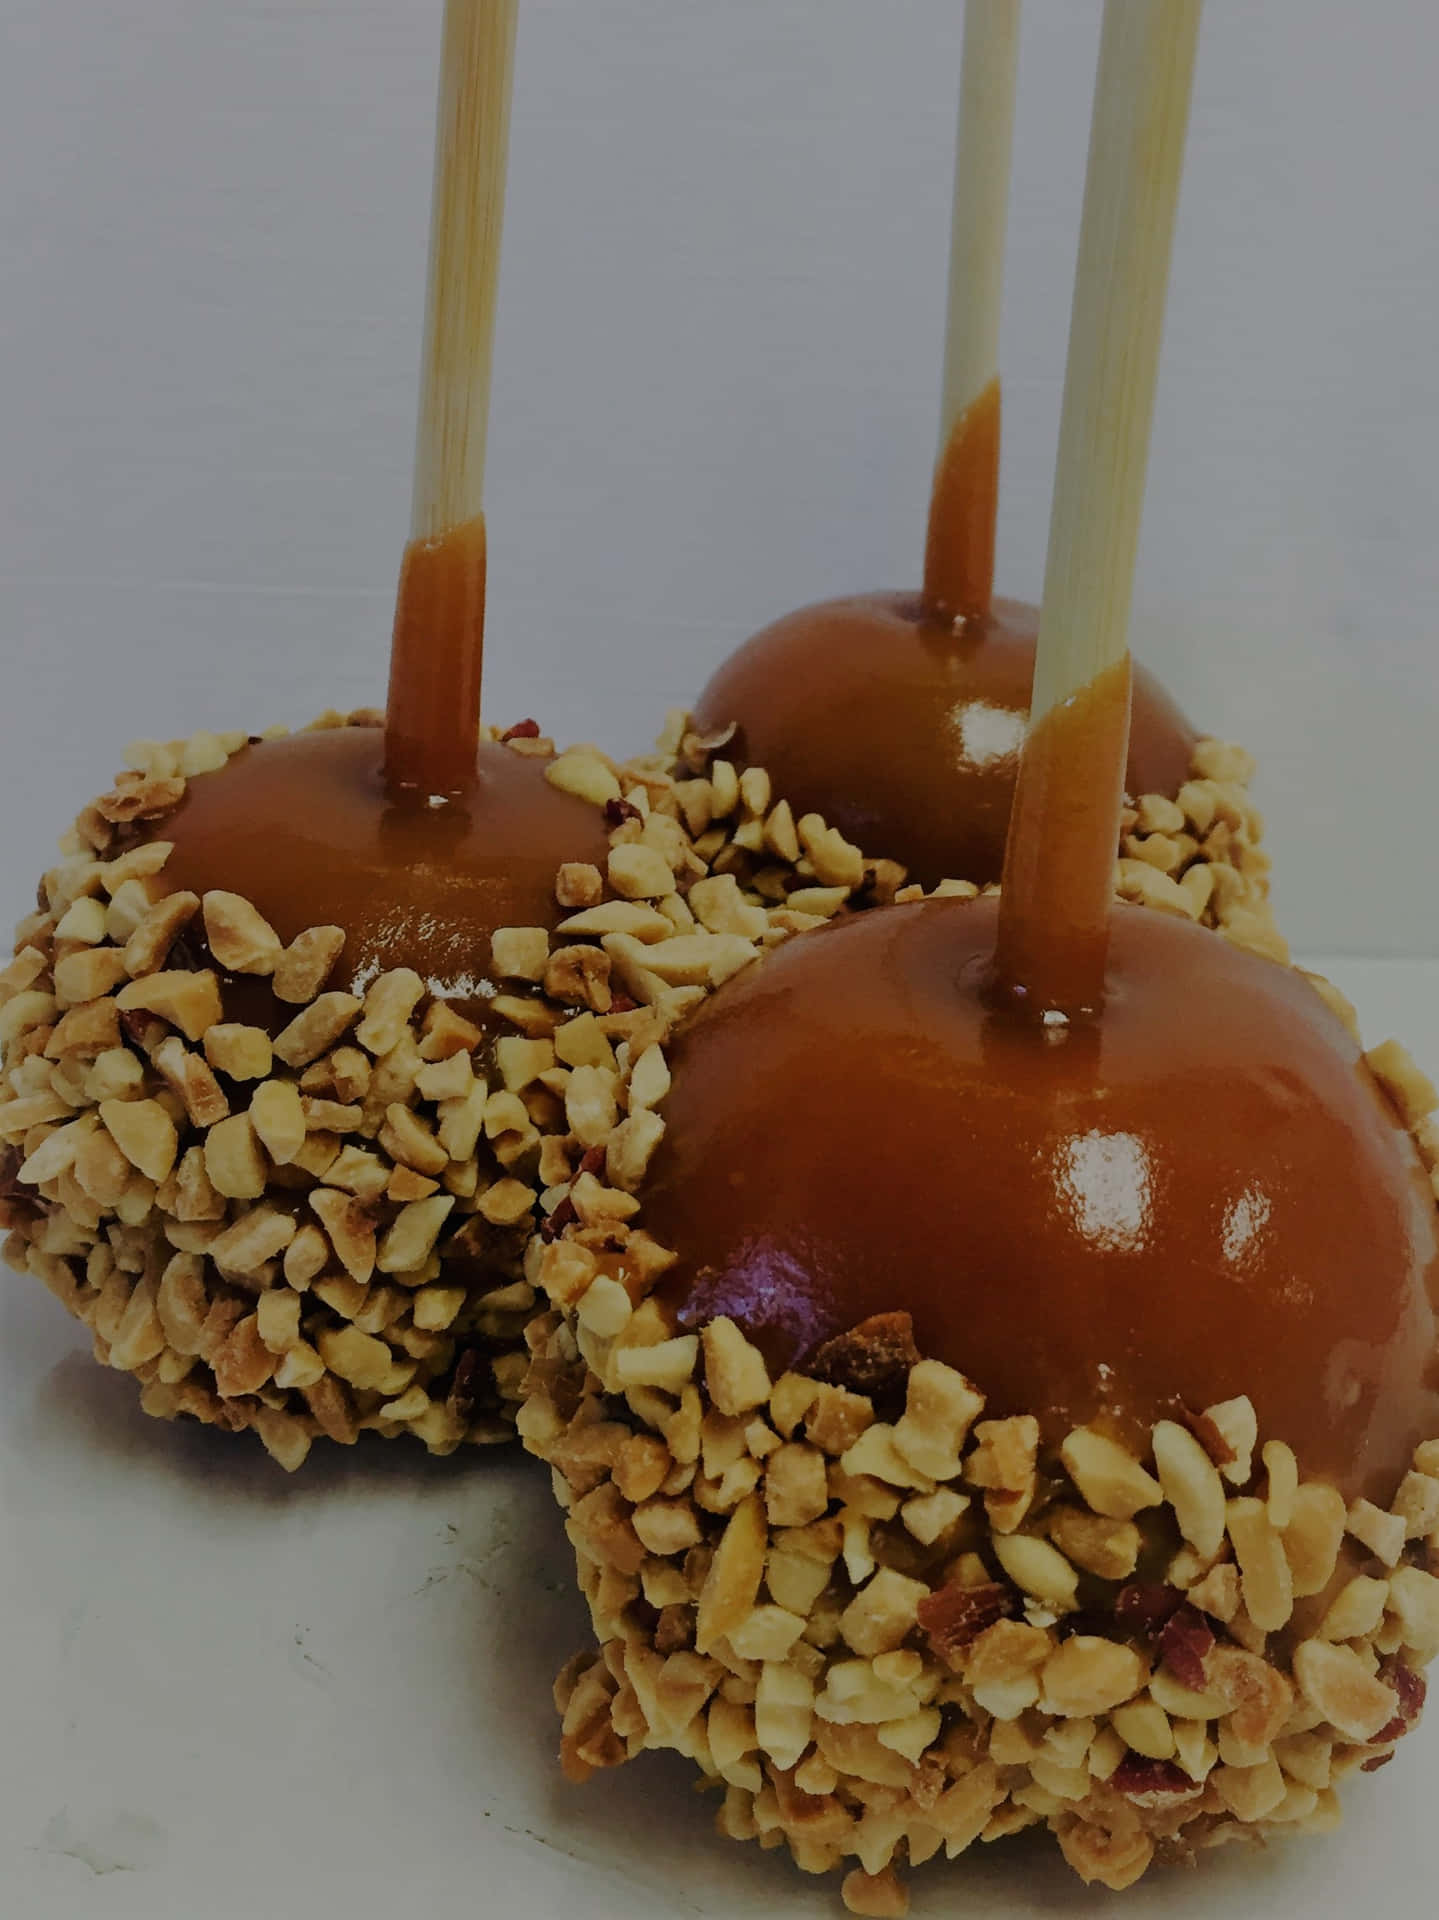 Caption: Caramel Apples on a Wooden Table Wallpaper